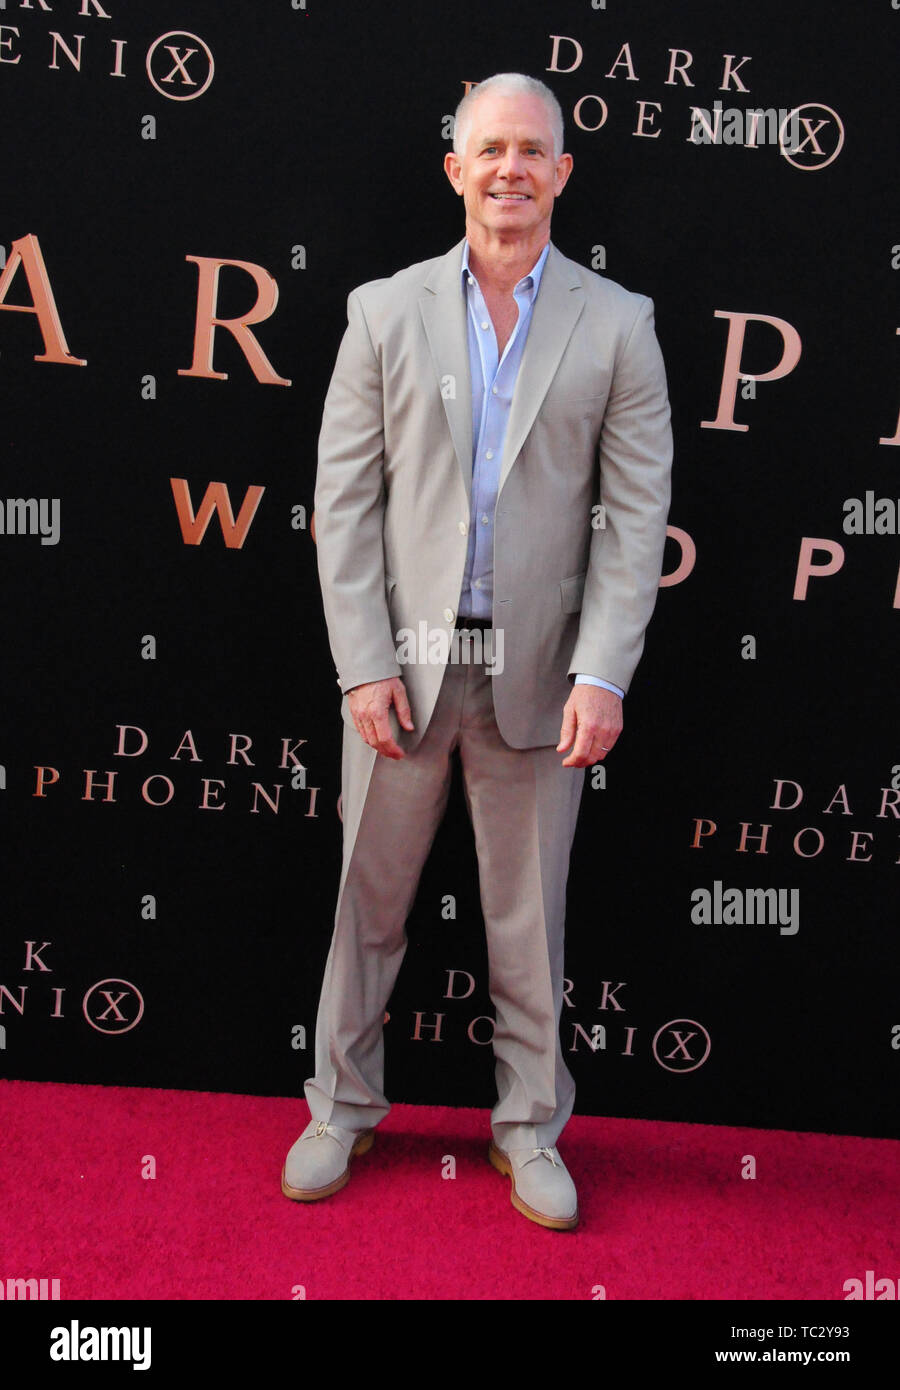 Hollywood, California, USA 4th June 2019 Producer Hutch Parker attends the World Premiere of 20th Century Fox's 'Dark Phoenix' on June 4, 2019 at TCL Chinese Theatre IMAX in Hollywood, California, USA. Photo by Barry King/Alamy Live News Stock Photo